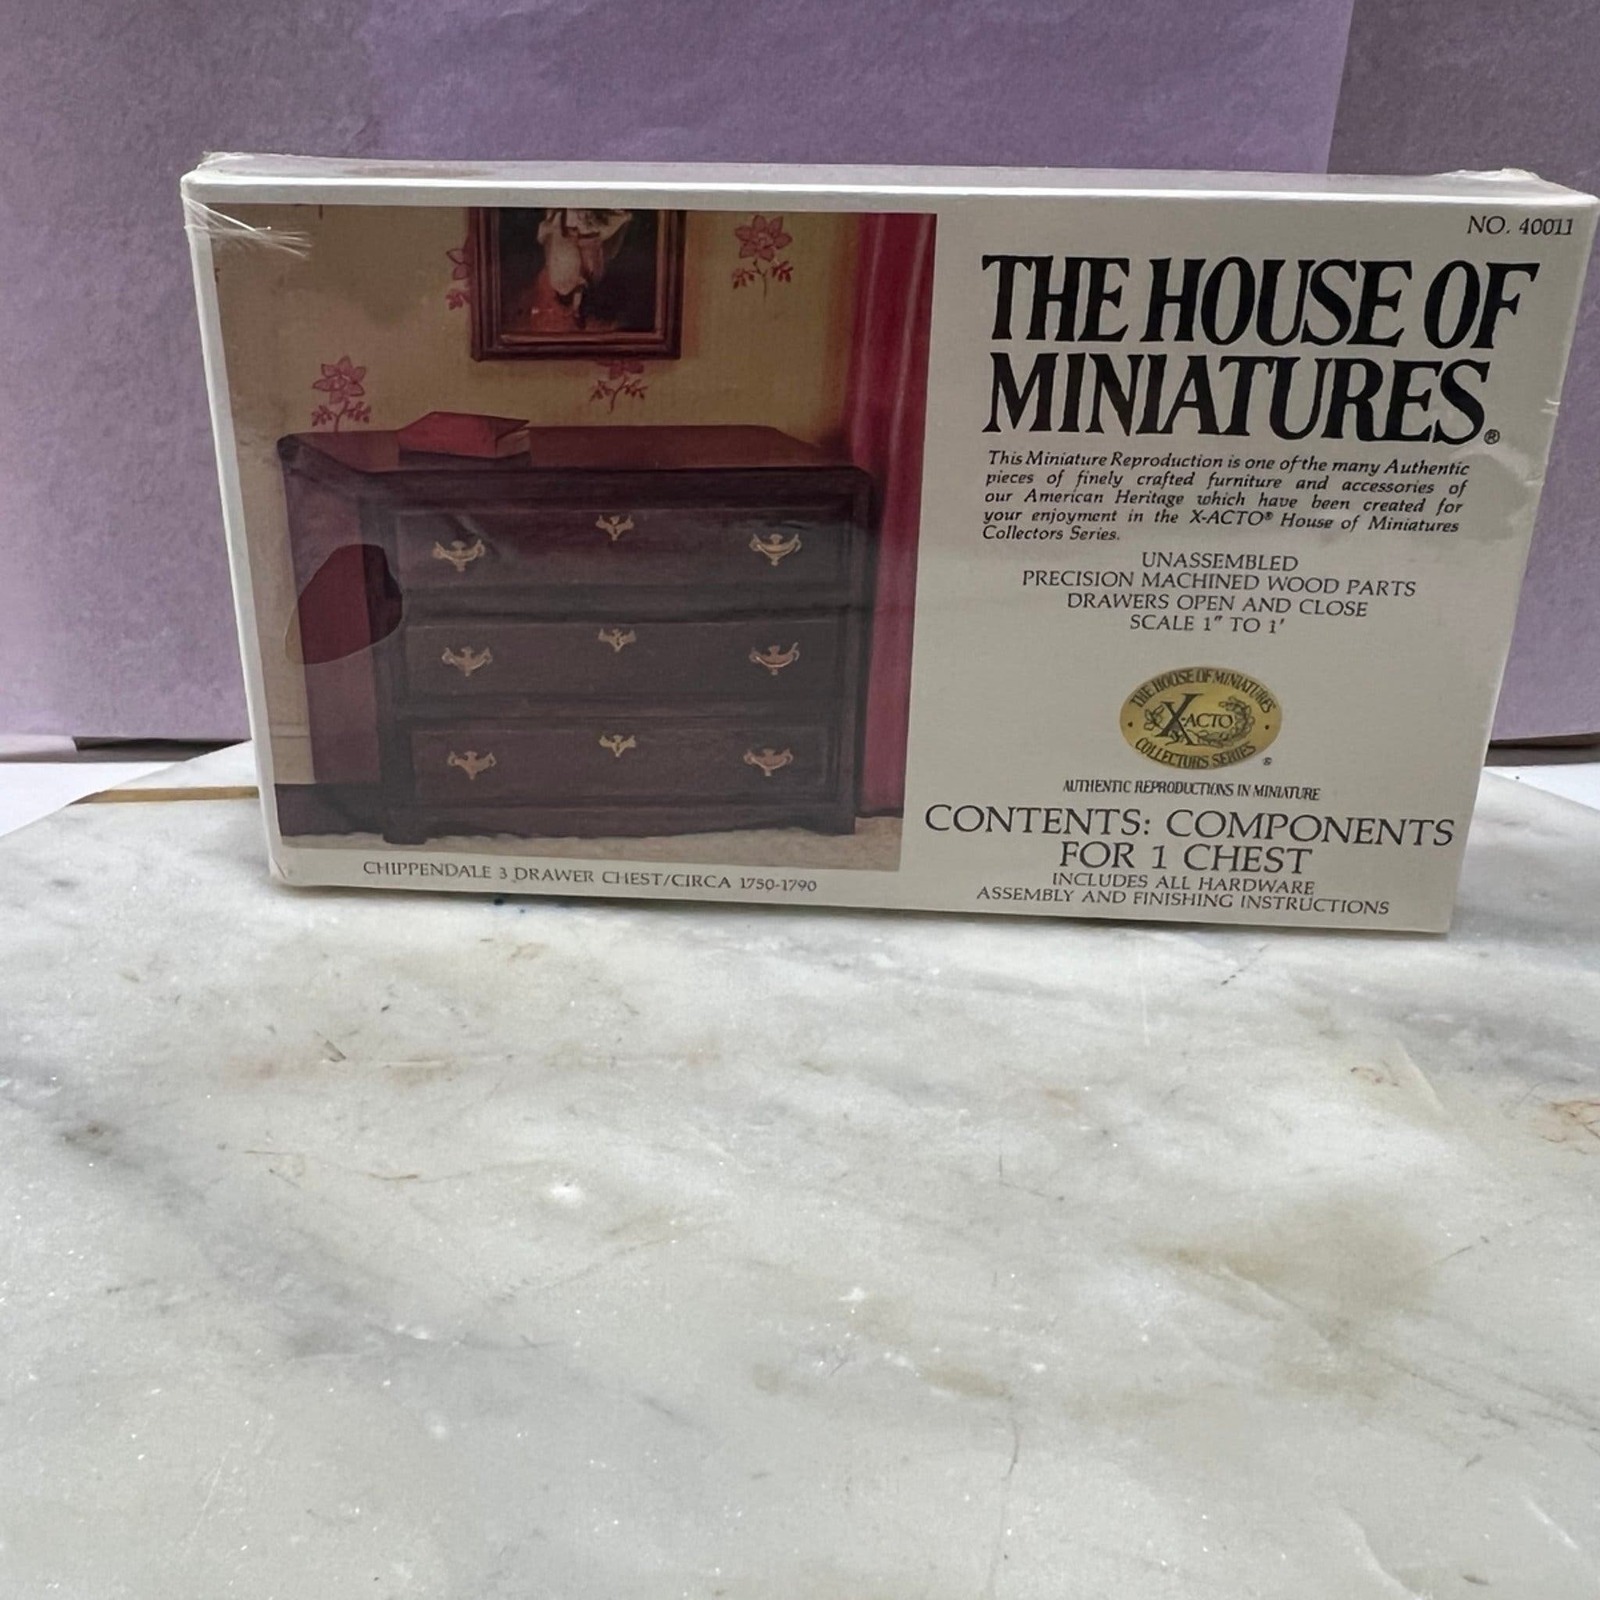 1977 The House of Miniatures Chippendale 3 Drawer Chest Circa 1750-1790 - $9.90